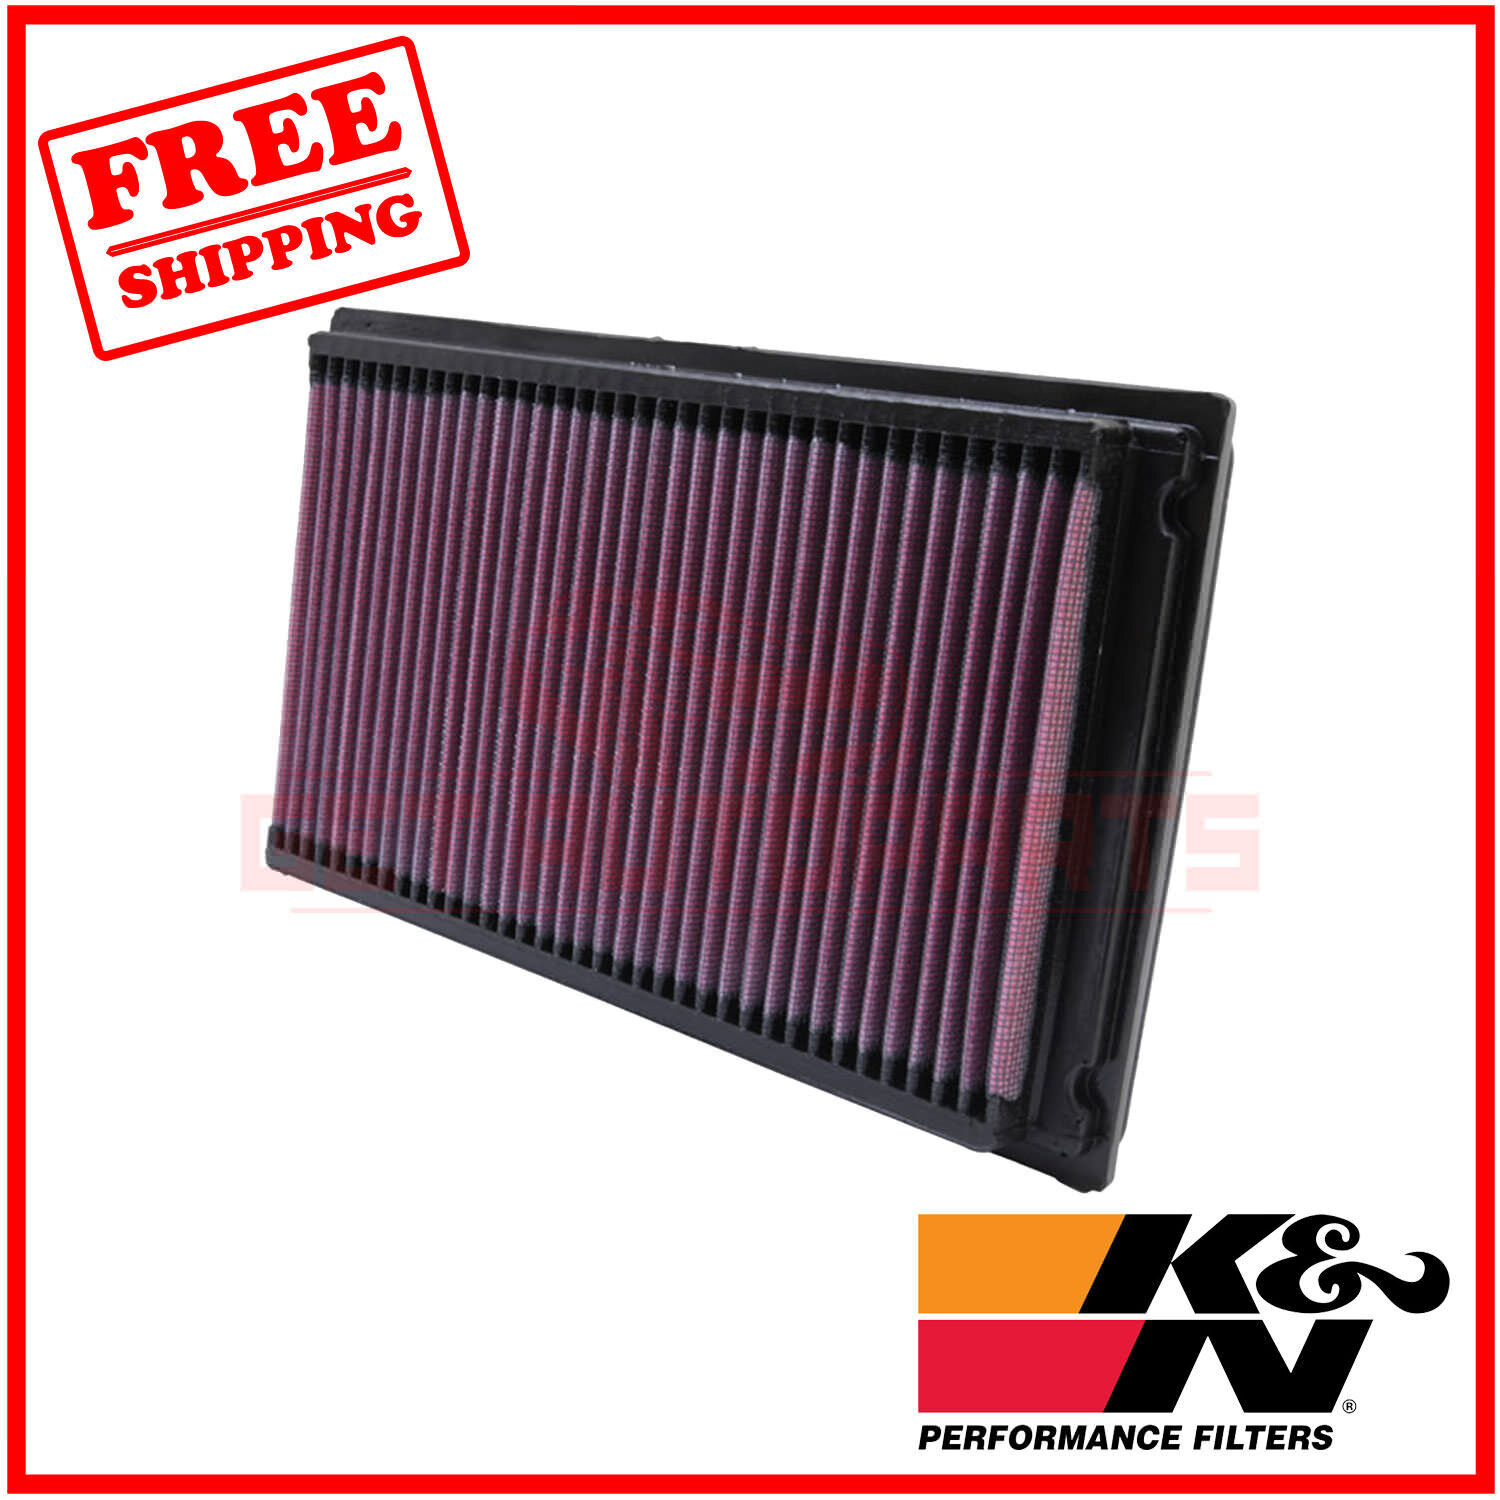 K&N Replacement Air Filter for Nissan Pulsar NX 1987-1990